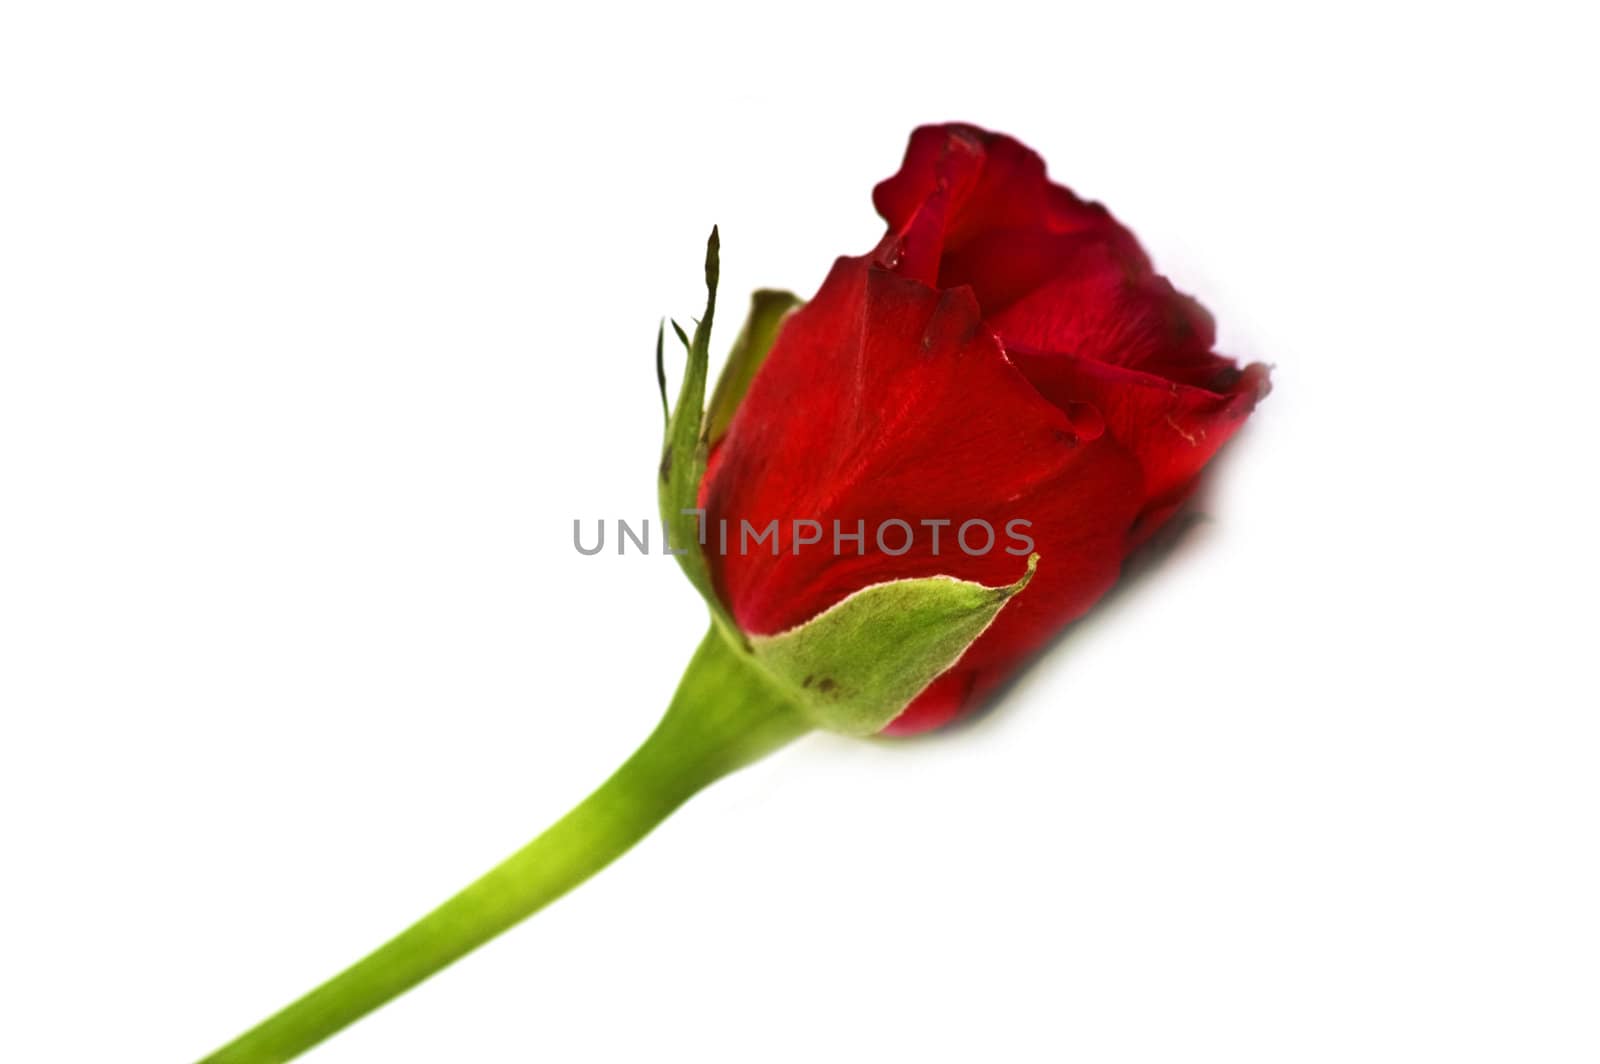 Isolated red rose close-up by mylips